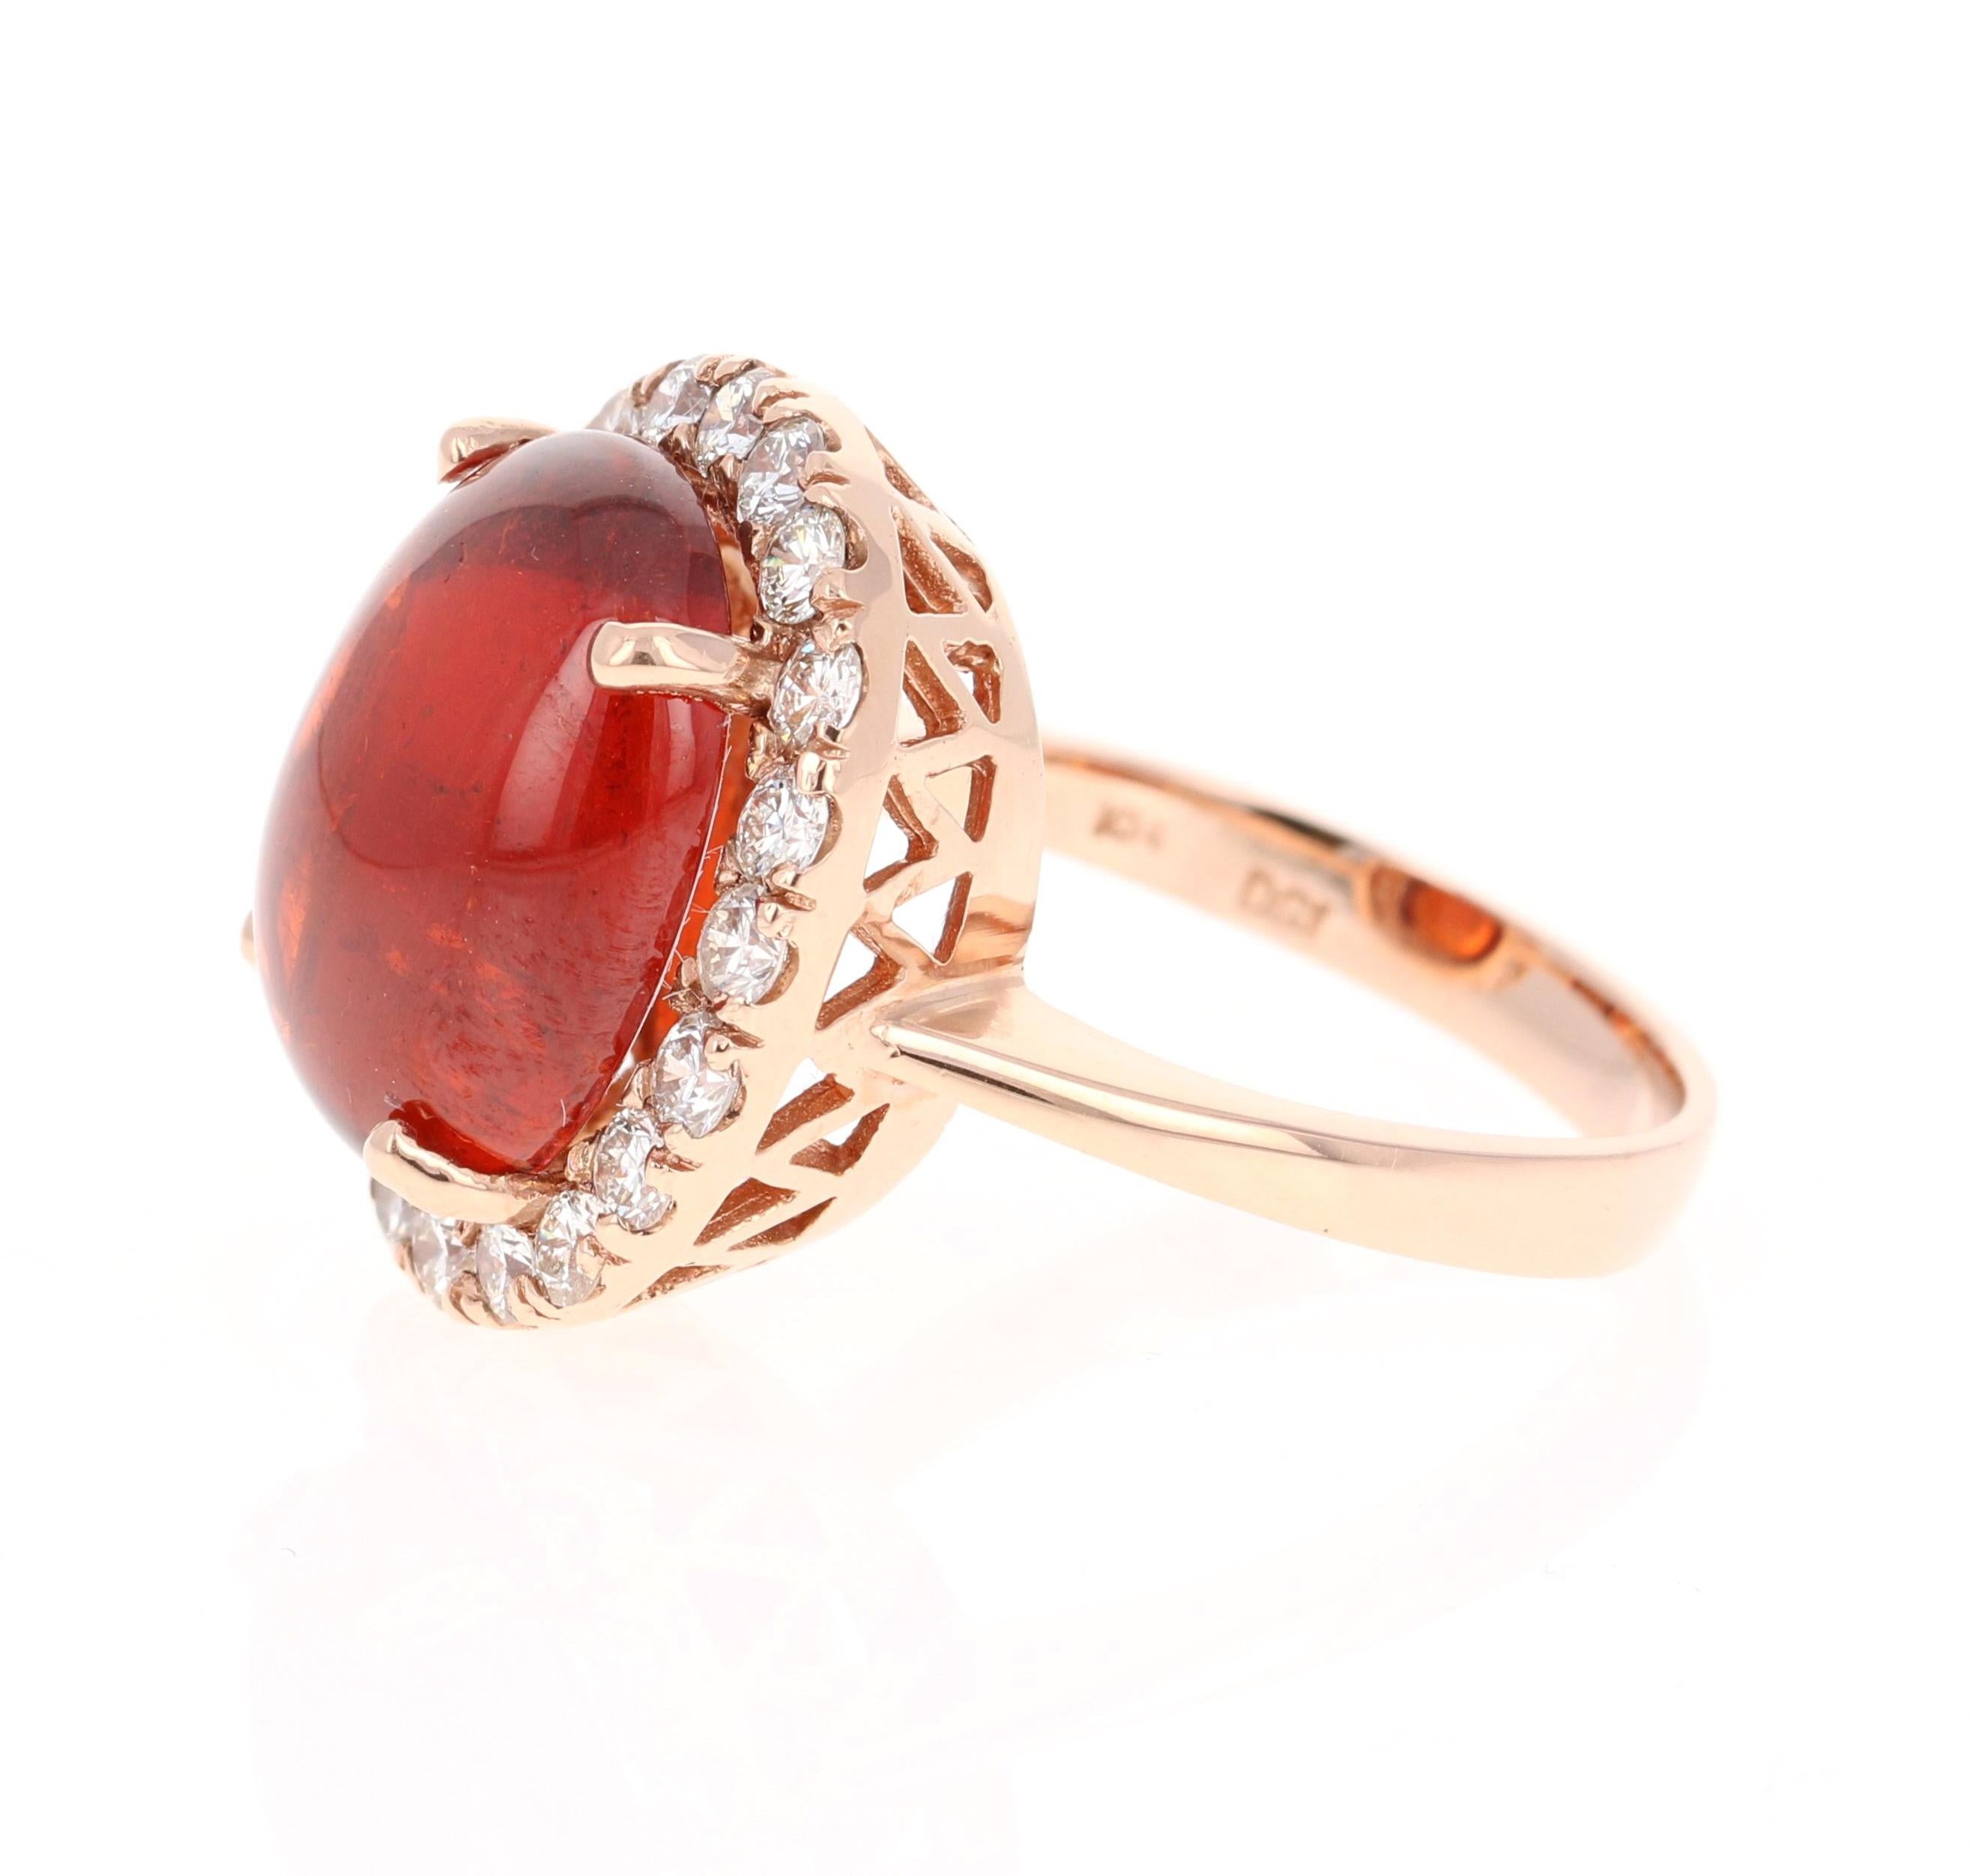 This breath taking ring has a 14.05 Carat Oval Cabochon Cut Spessartine Garnet. Spessartines are natural gemstones found in the Garnet family. It has 20 Round Cut Diamonds that weigh 1.09 Carats. The clarity and color of the diamonds are VS2-H. The